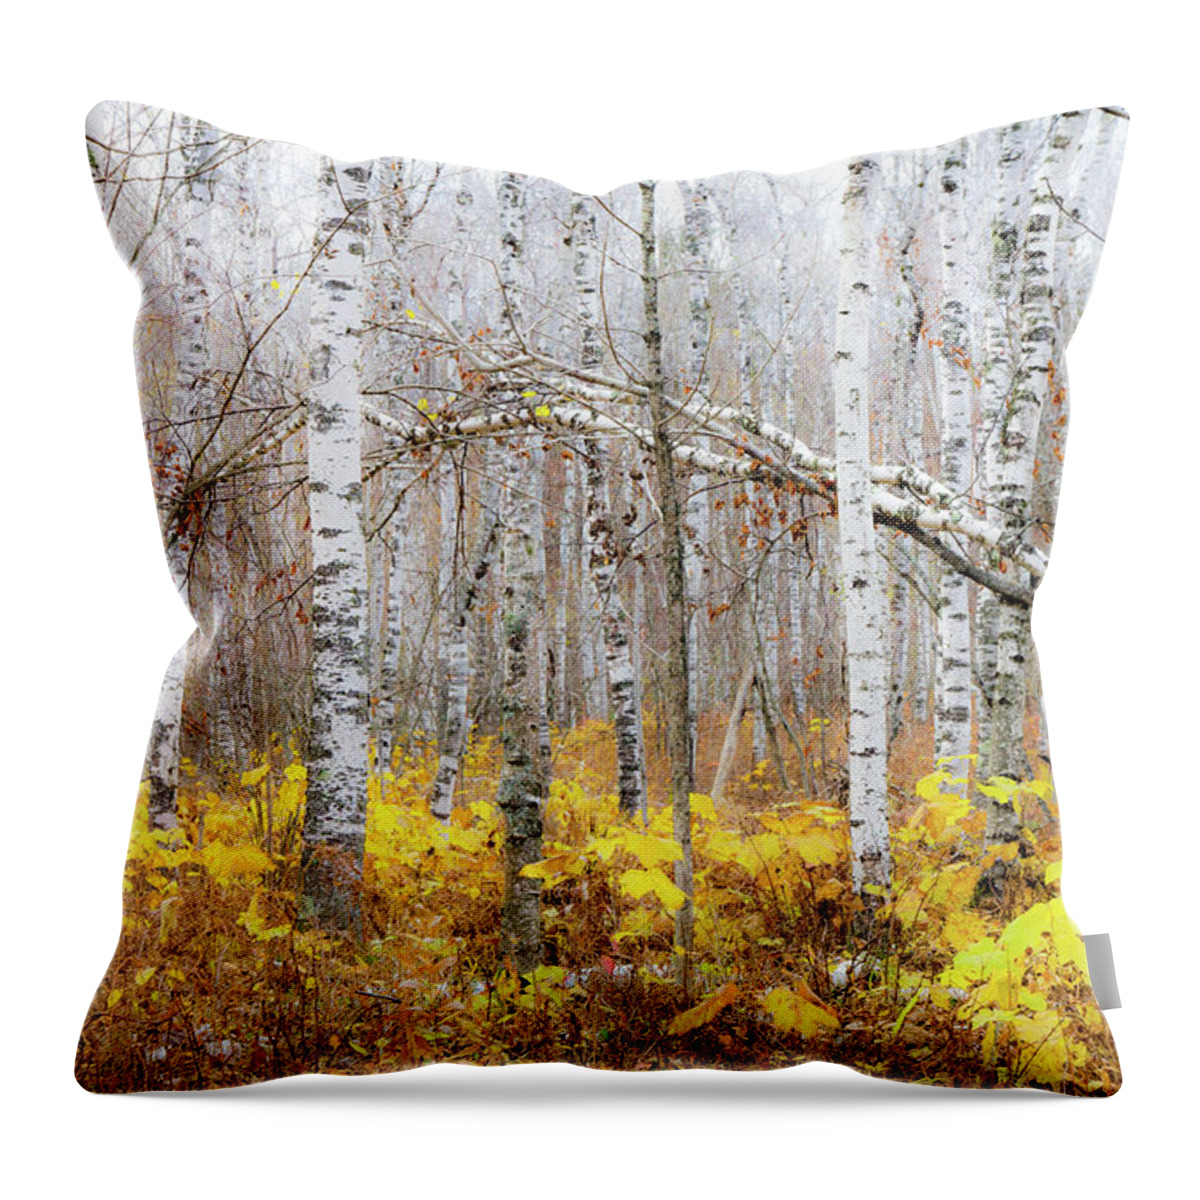 Golden Slumbers Throw Pillow featuring the photograph Golden Slumbers by Mary Amerman